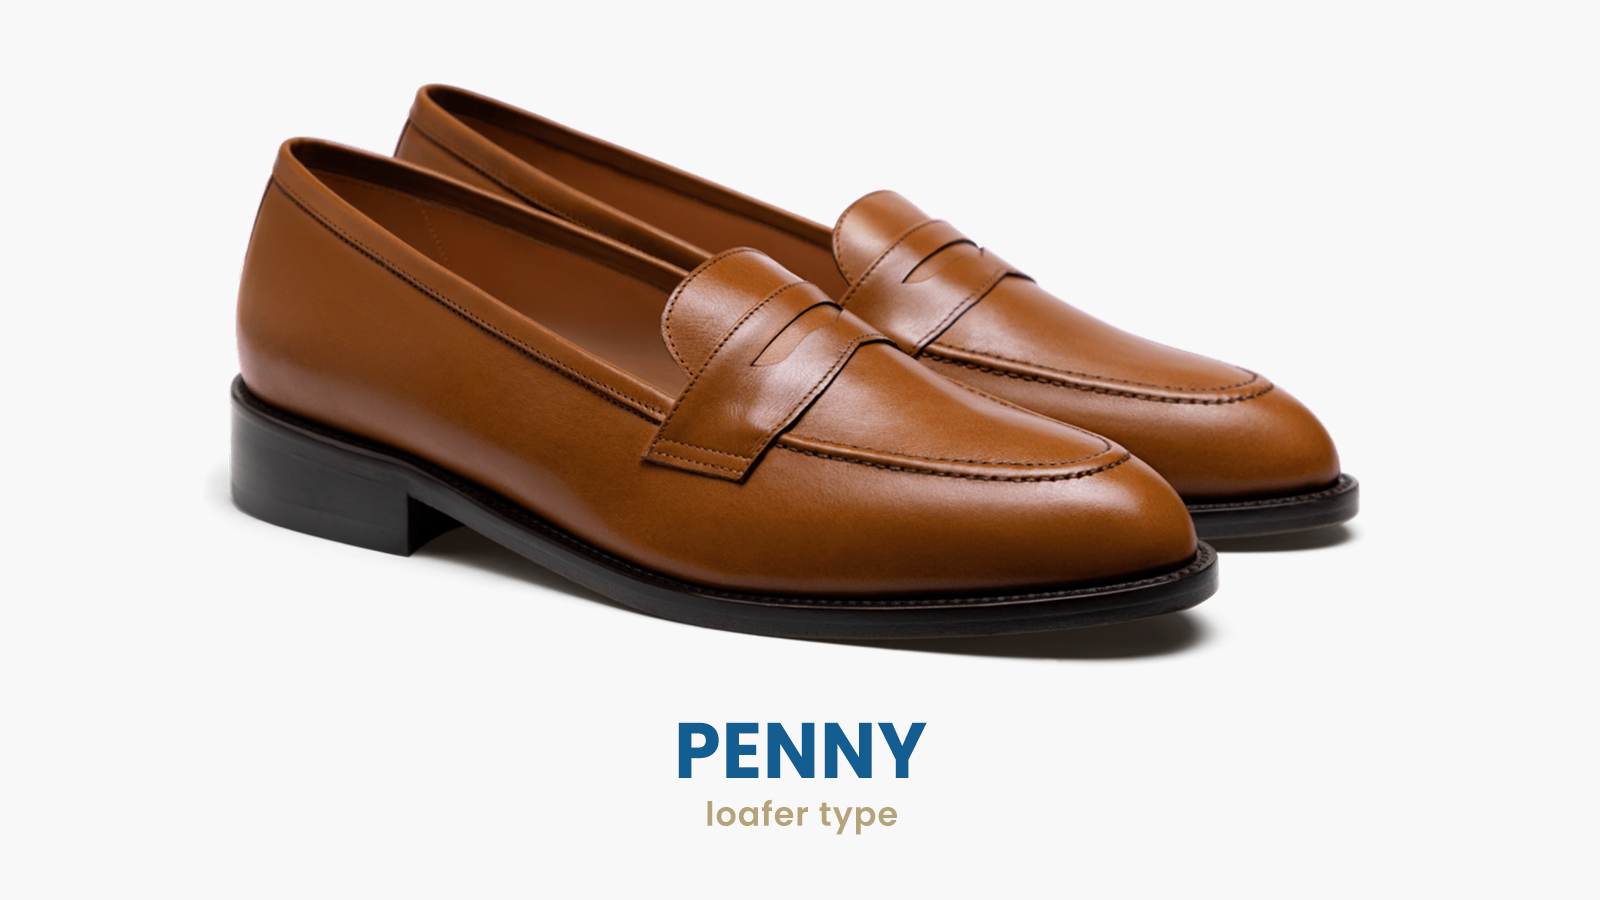 penny loafer shoe style